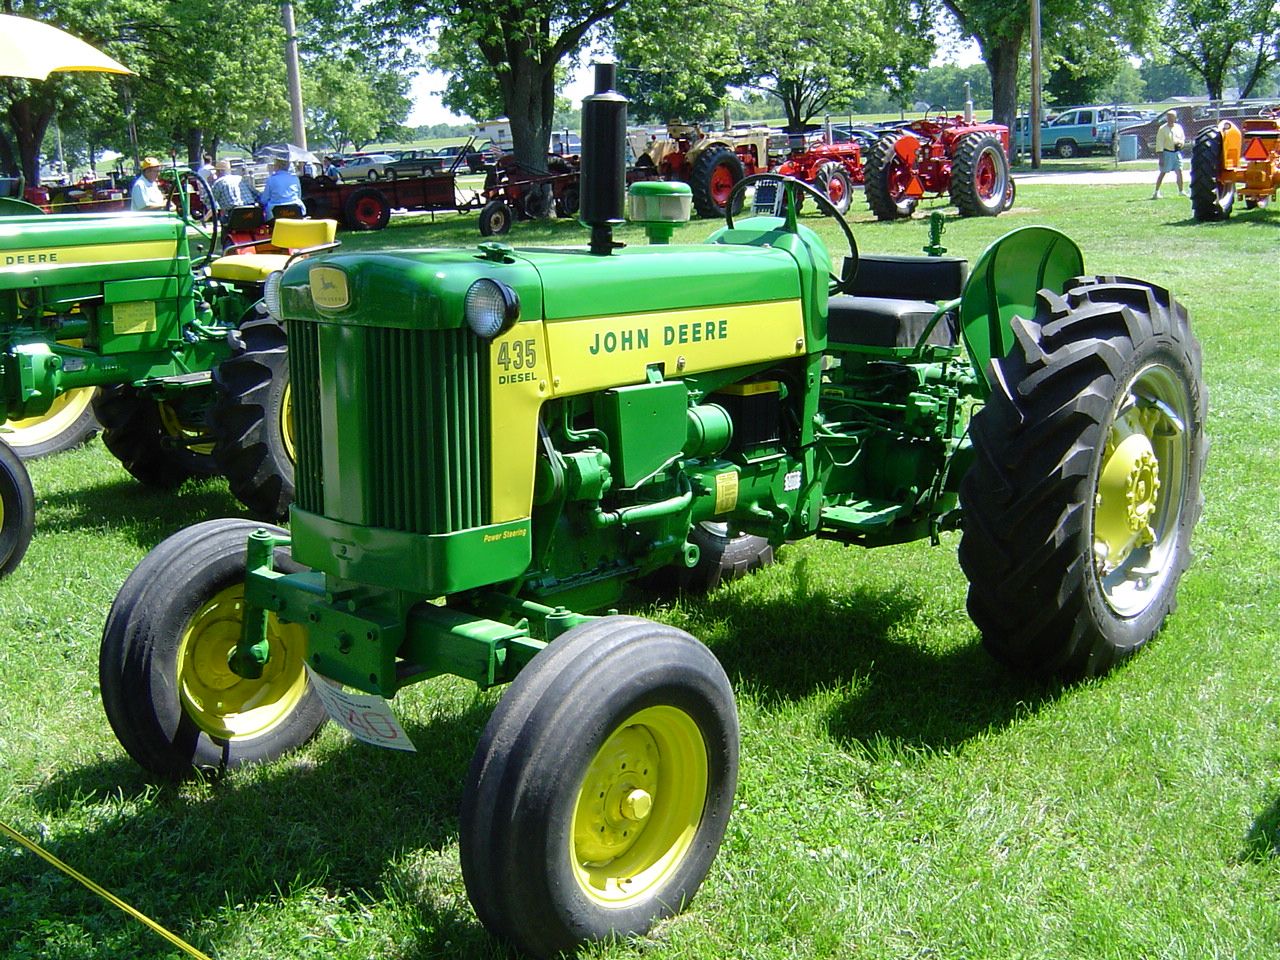 john deere 435 - group picture, image by tag - keywordpictures.com